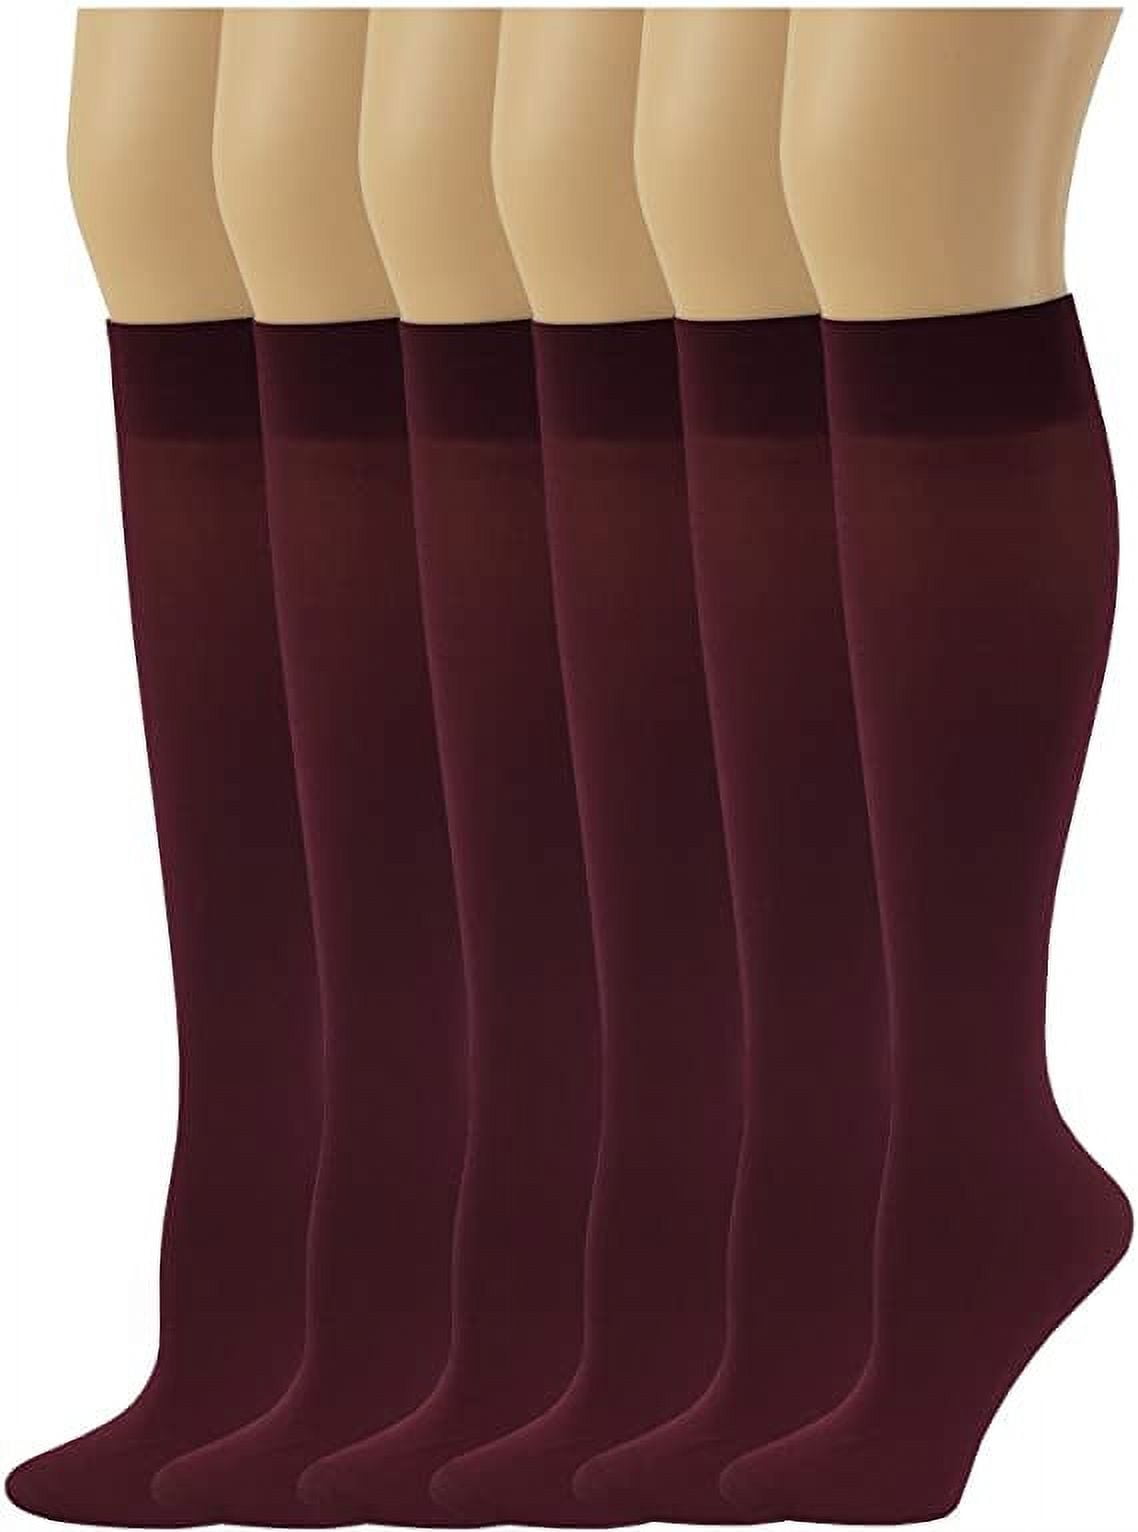 Sumona 6 Pairs Women Opaque Stretchy Spandex Knee High Trouser